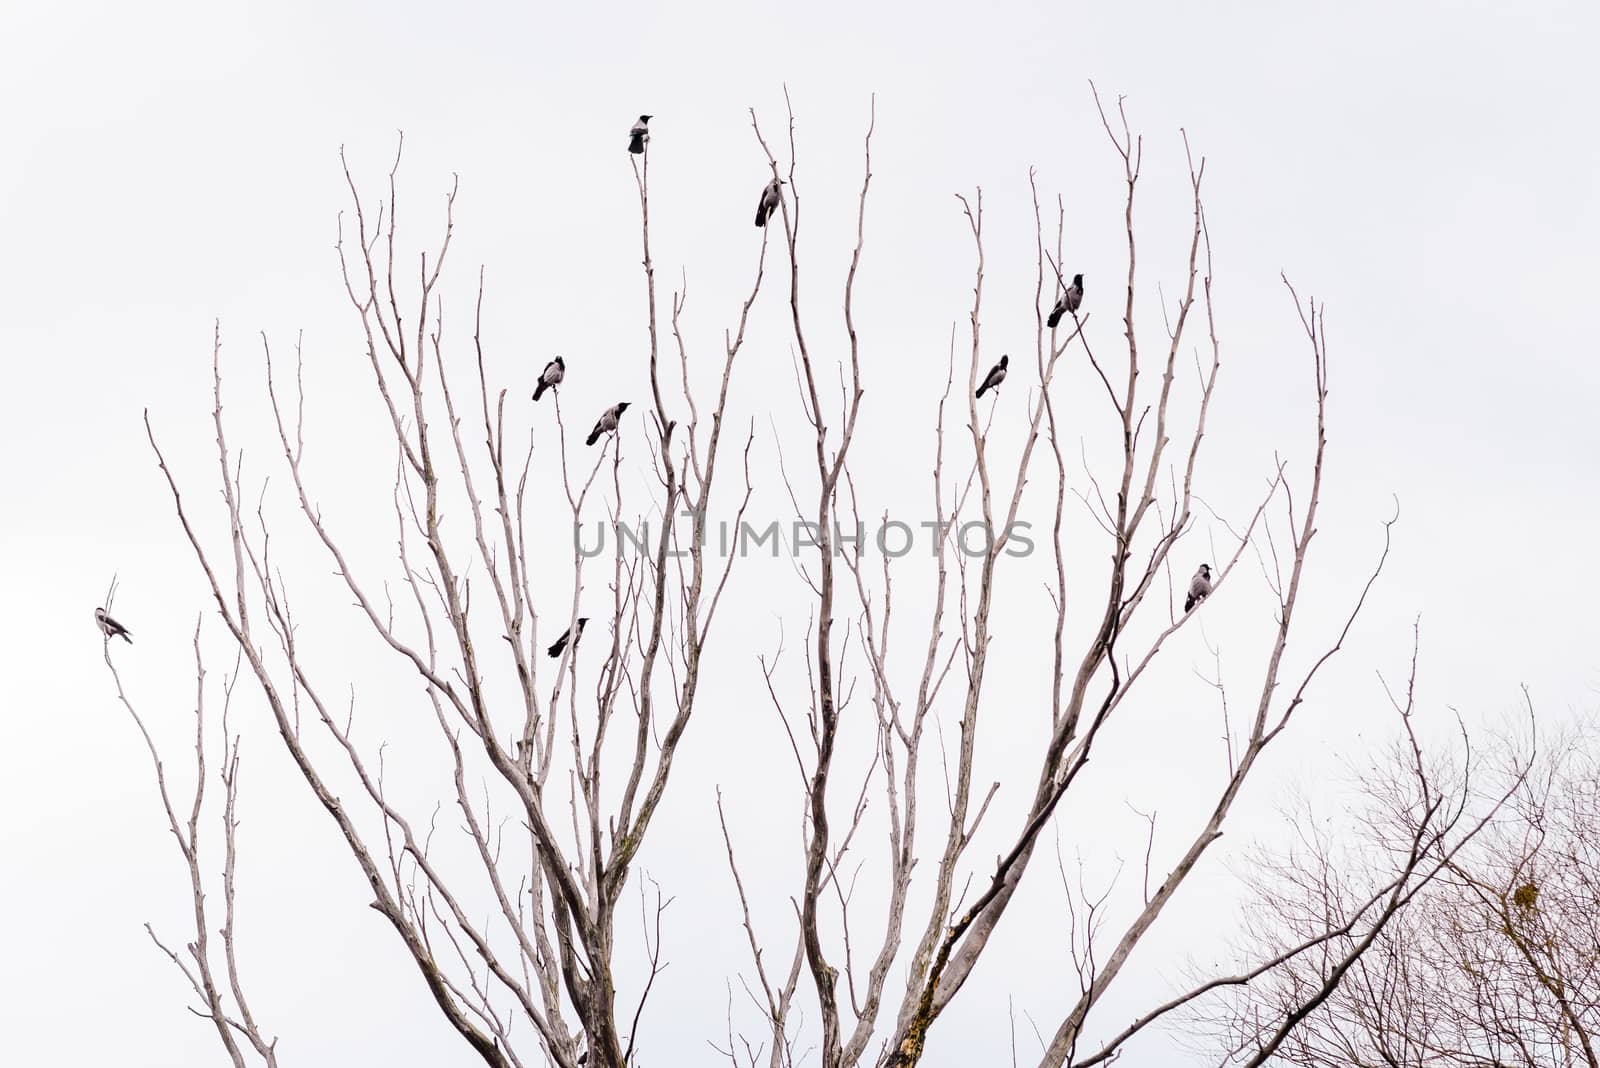 Hooded crows perched on the top of tree branches are waiting to take flight during a gray winter day